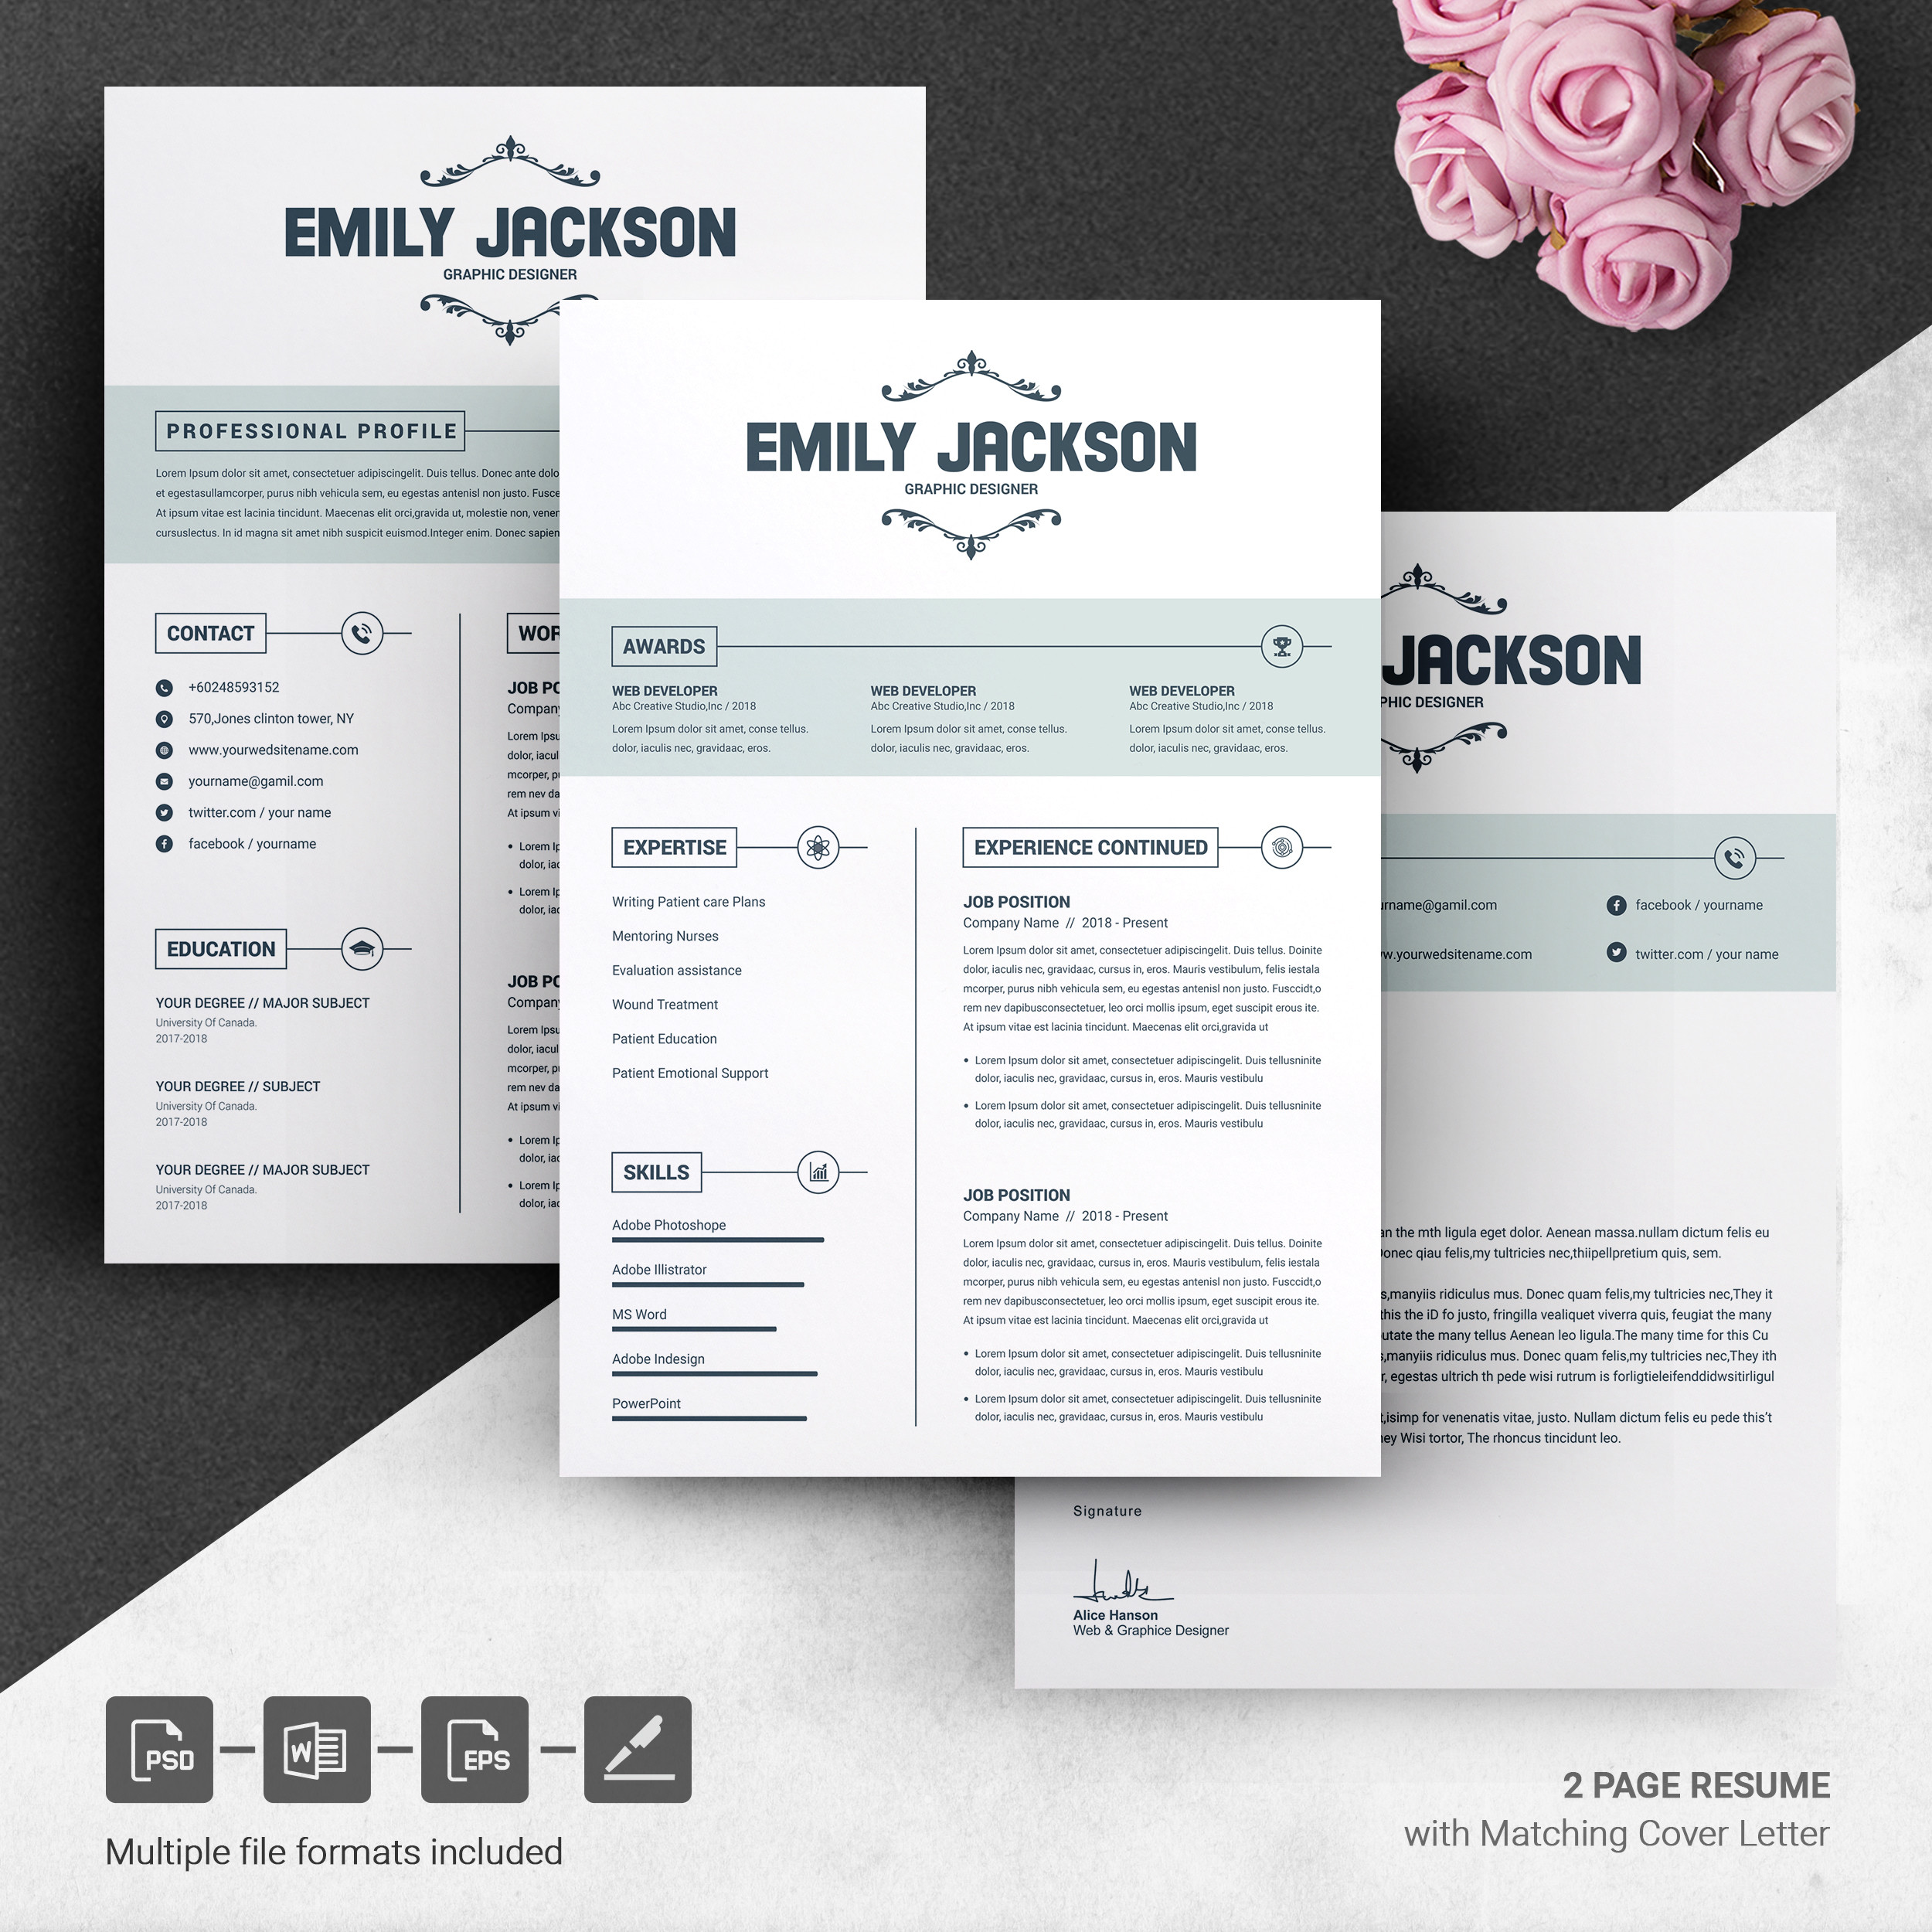 Free Online Resume and Cover Letter Templates Cv Template with Cover Letter â Free Resumes, Templates Pixelify.net